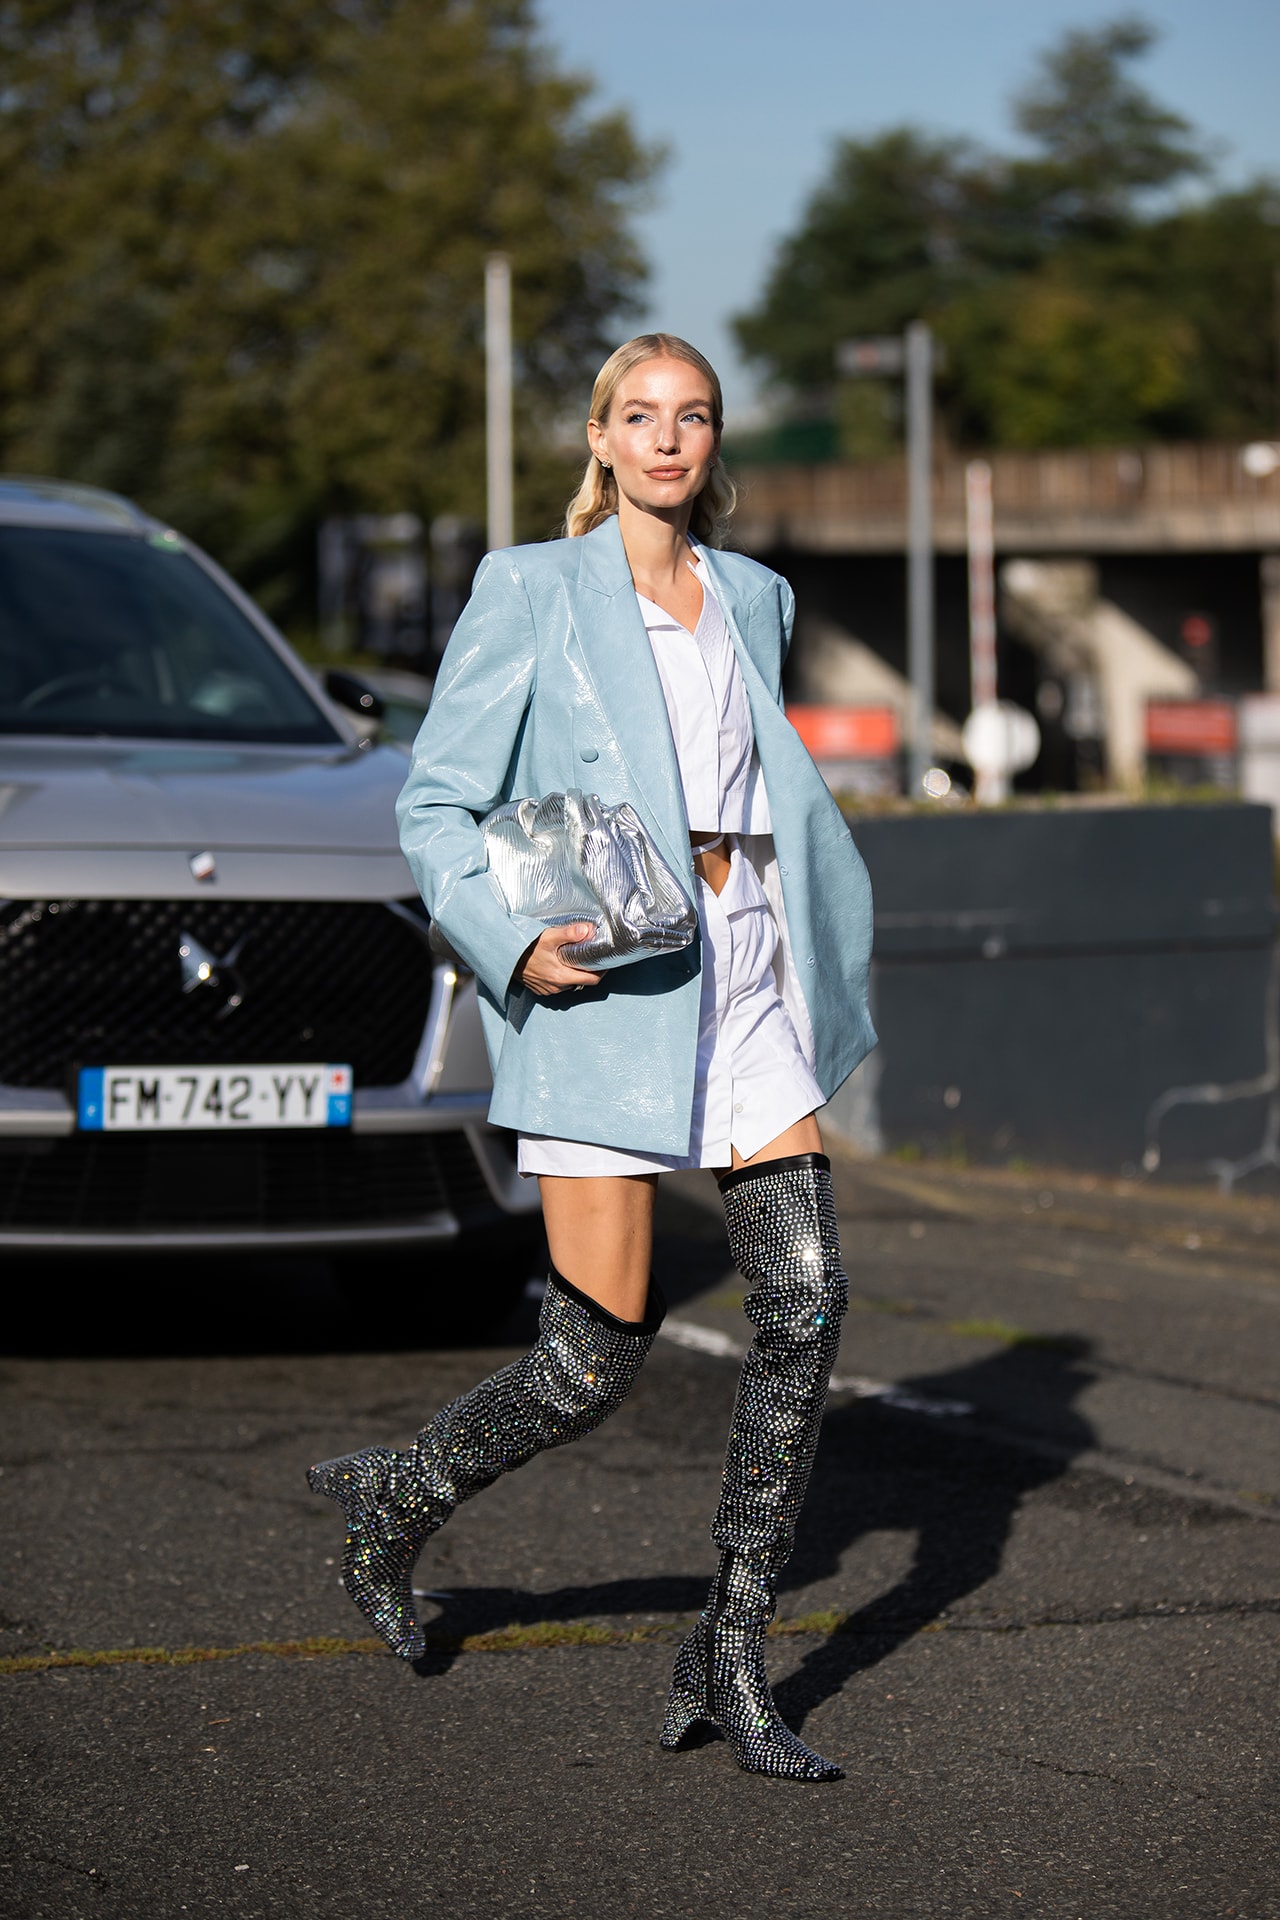 Paris Fashion Week Spring Summer 2022 SS22 Street Style Look Outfit Influencer Blue Jacket Sparkly Boots Silver Bottega Veneta Pouch Bag Clutch